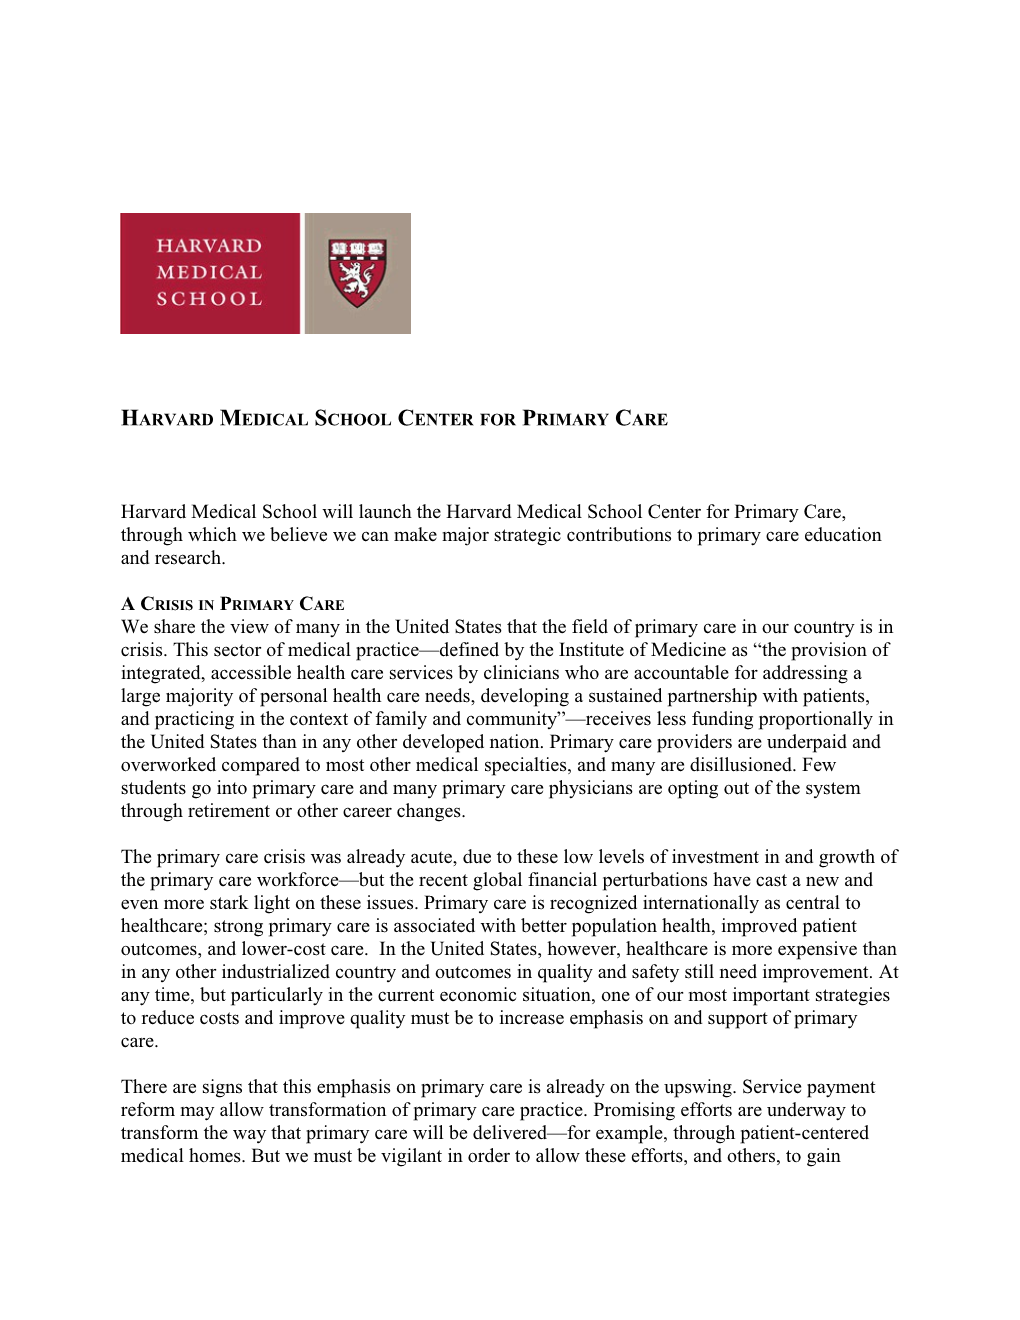 Harvard Medical School Center for Primary Care